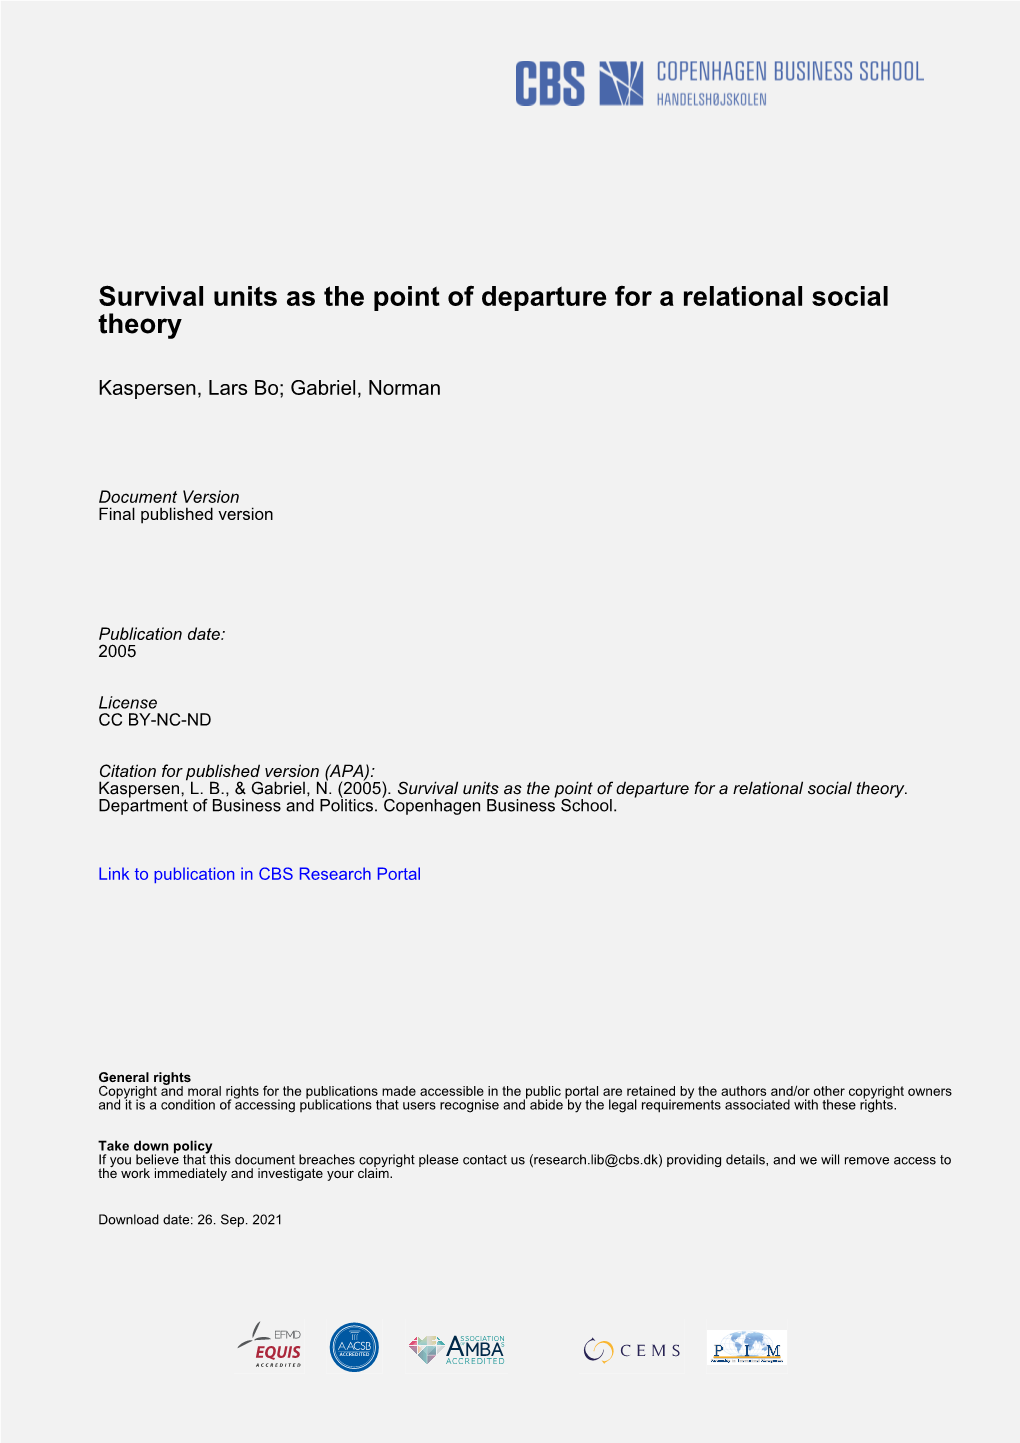 Survival Units As the Point of Departure for a Relational Social Theory